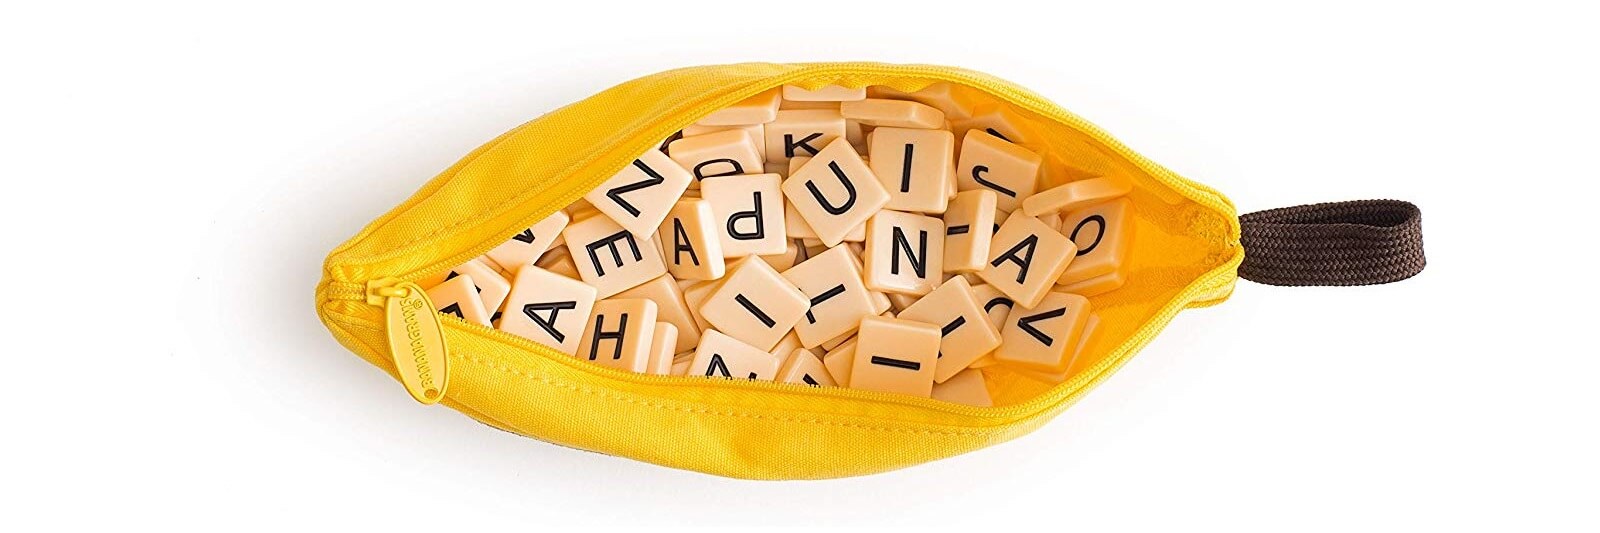 Bananagrams Board Game - Review, Rules & Instructions (Ratings 8/10)